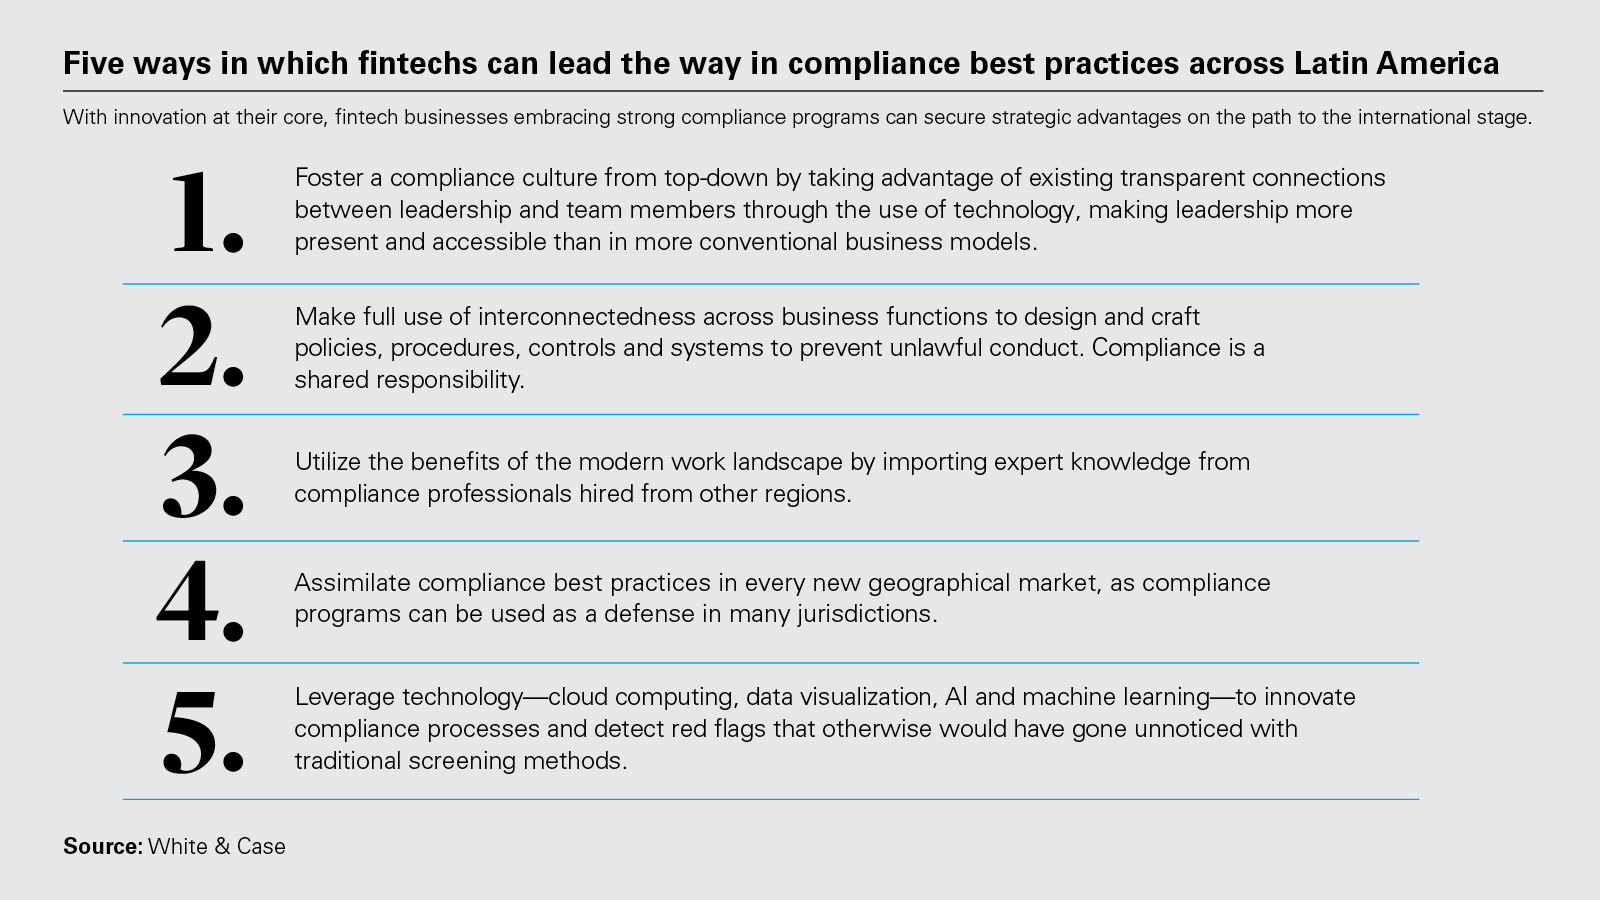 Five ways in which fintechs can lead the way in compliance best practices across Latin America